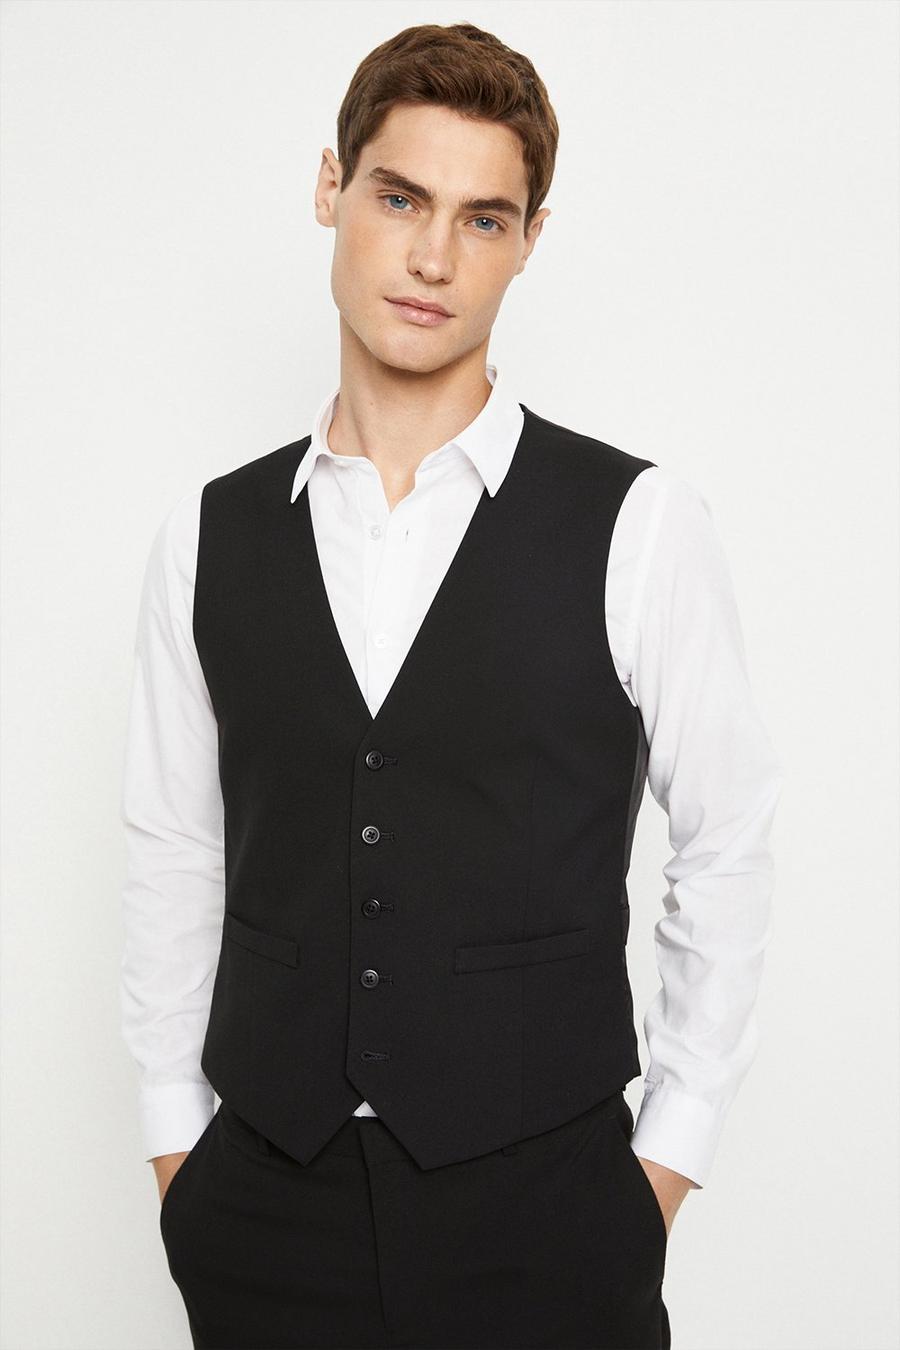 Plus And Tall Tailored Black Waistcoat